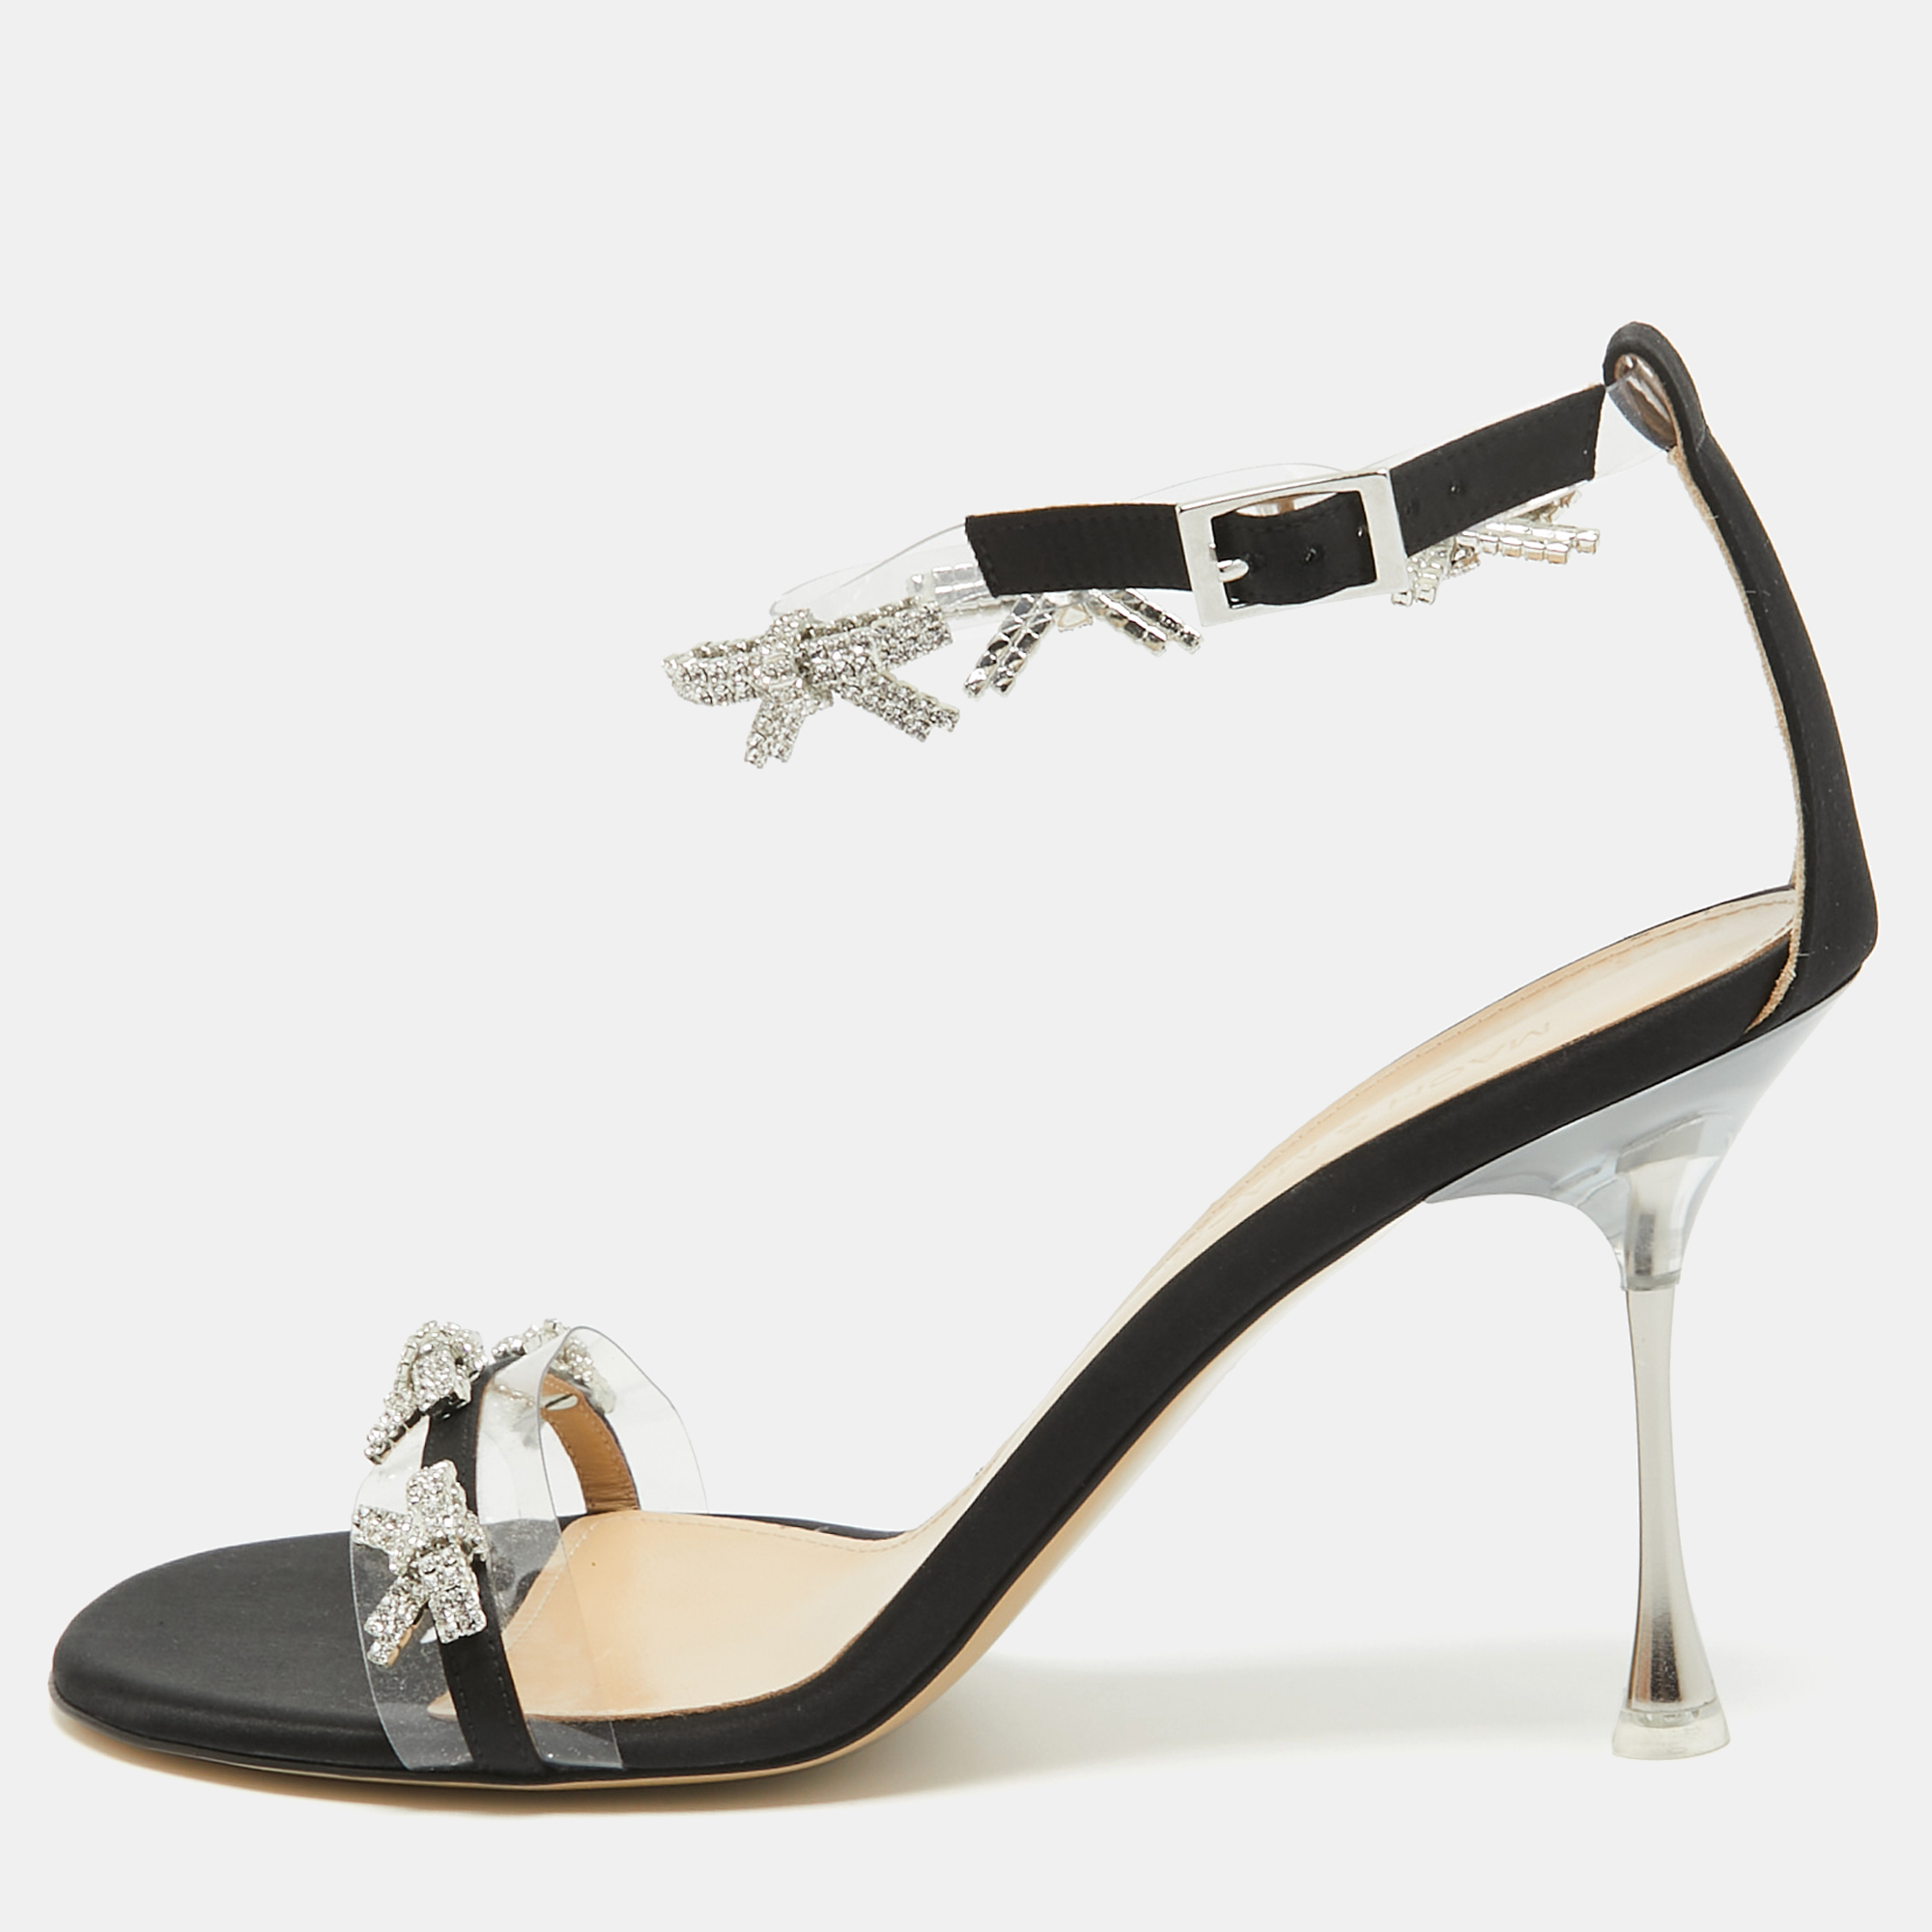 Mach & mach transparent pvc and satin floating crystal bow sandals size 39